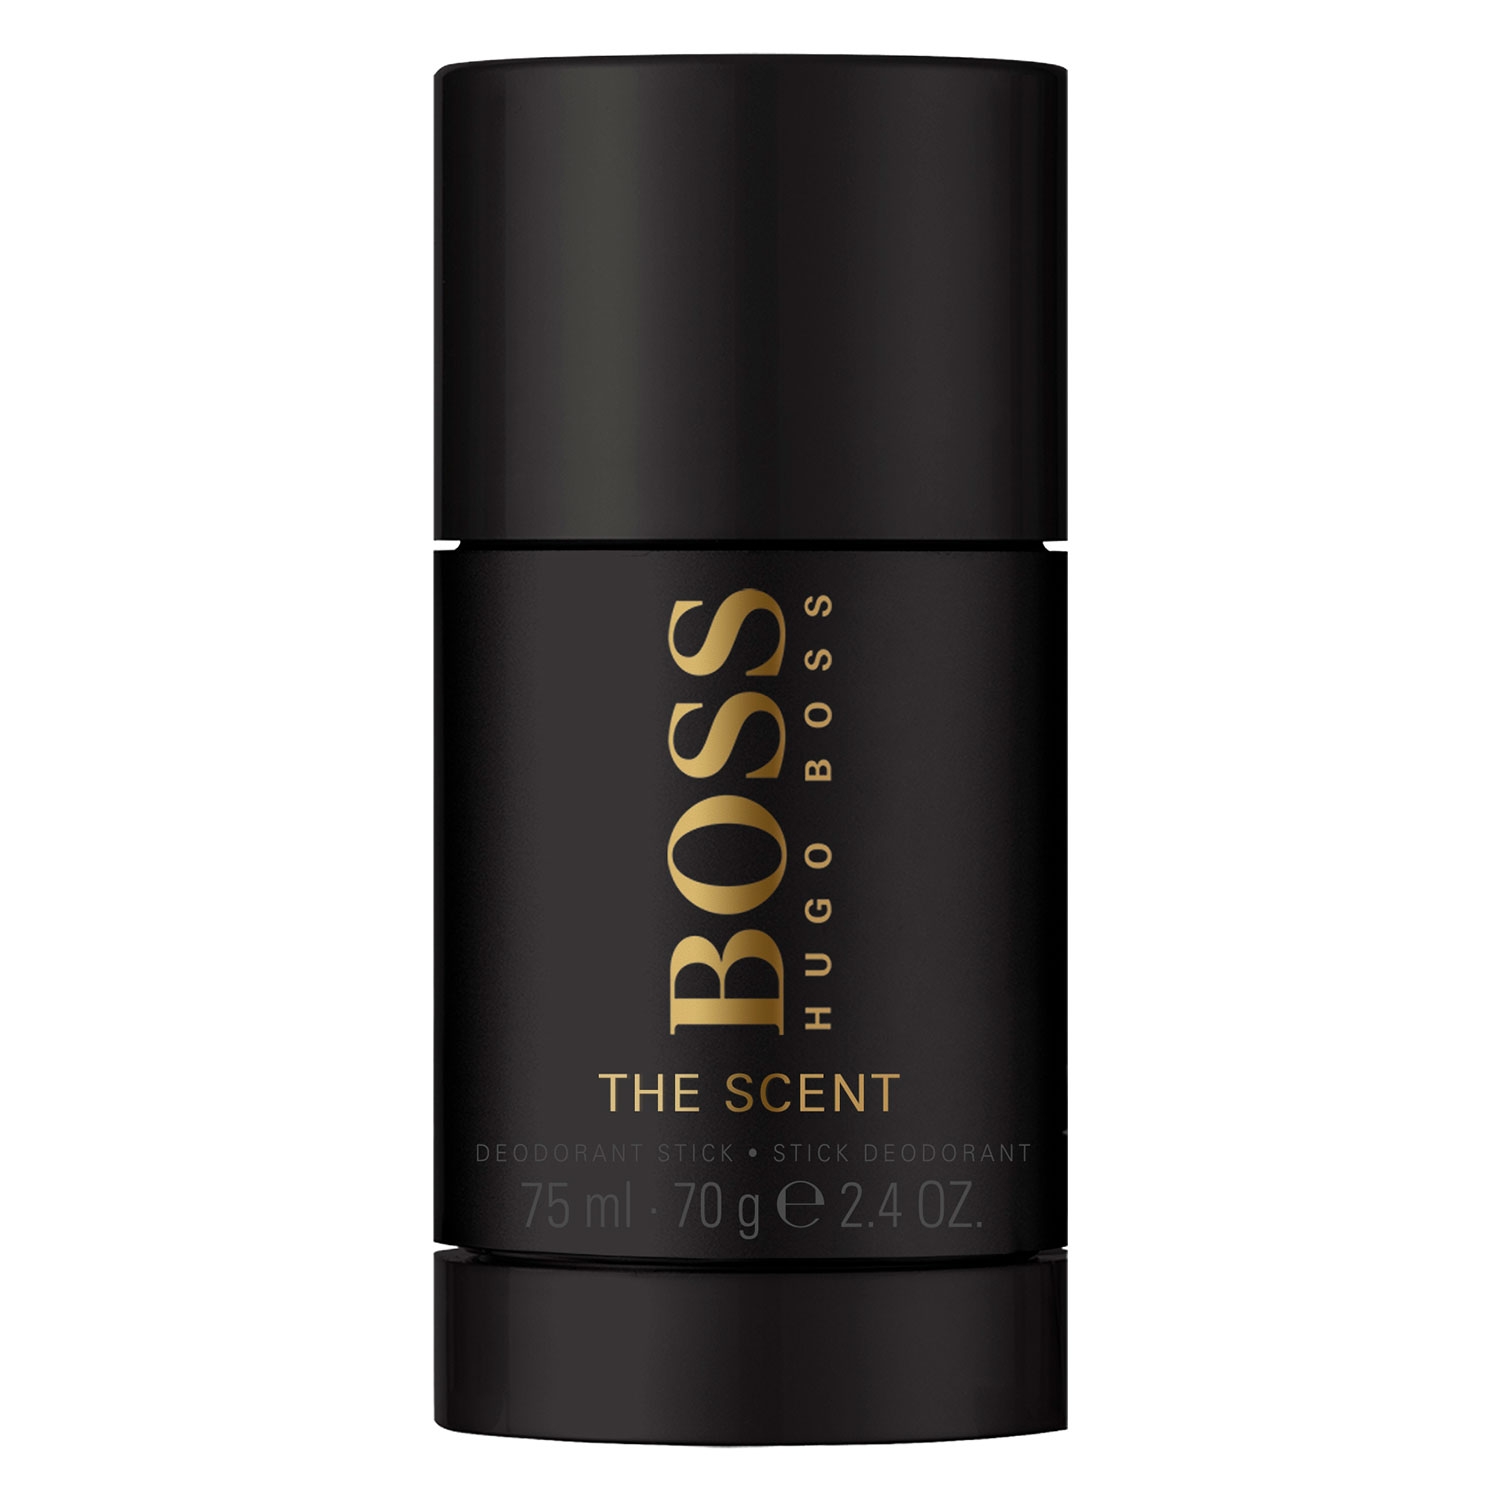 Product image from Boss The Scent - Deodorant Stick